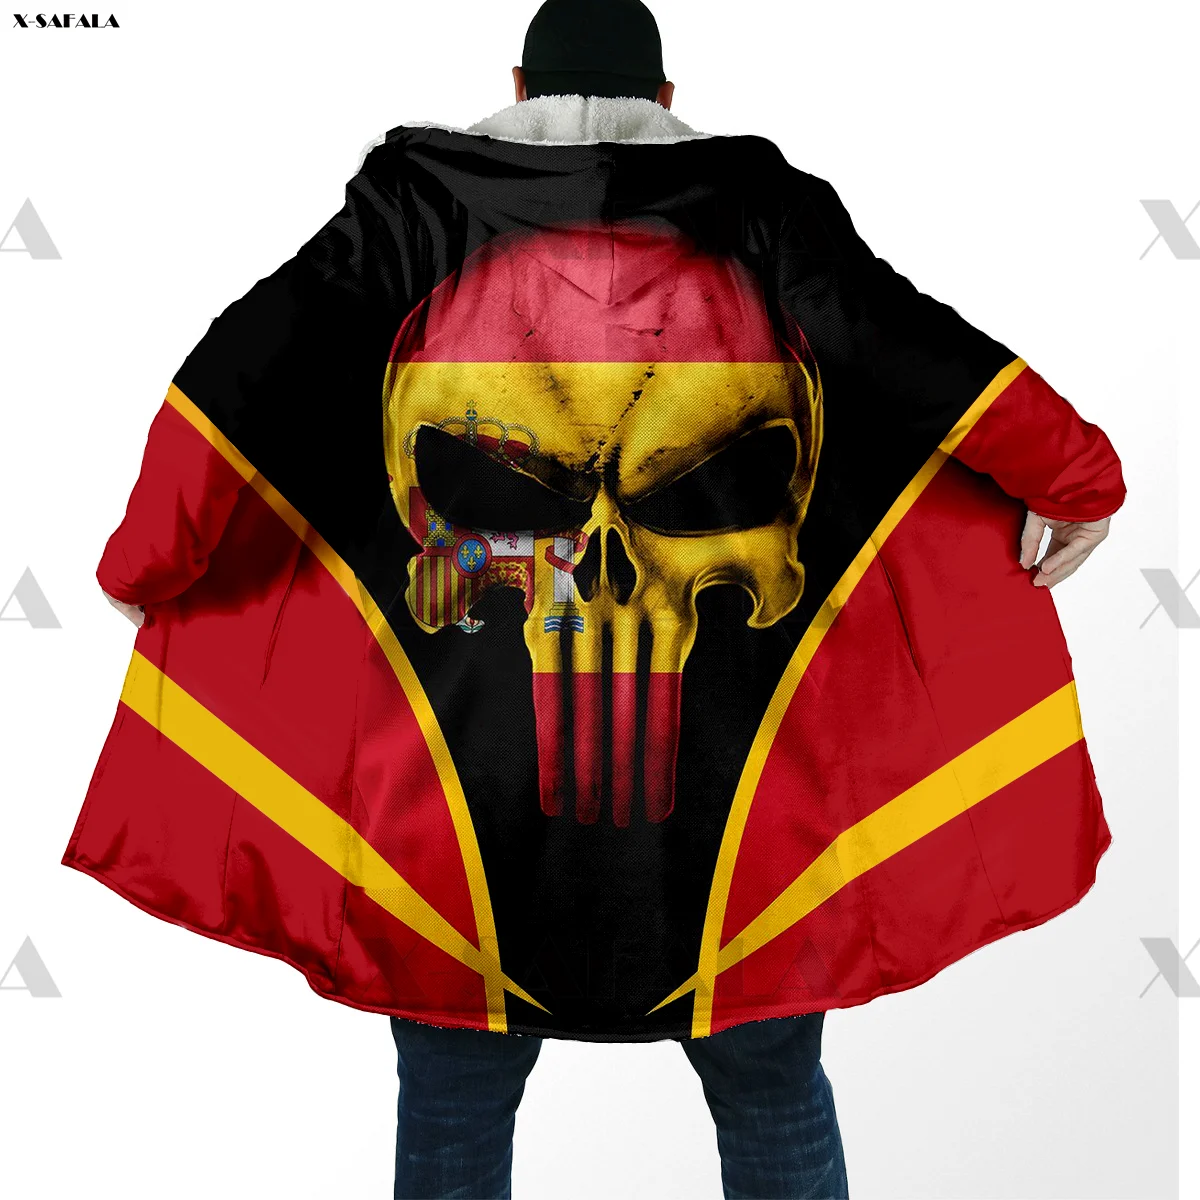 

Spain Skull Country Flag Map Lion 3D Printed Hoodie Long Duffle Topcoat Hooded Blanket Cloak Thick Jacket Cotton Cashmere Fleece